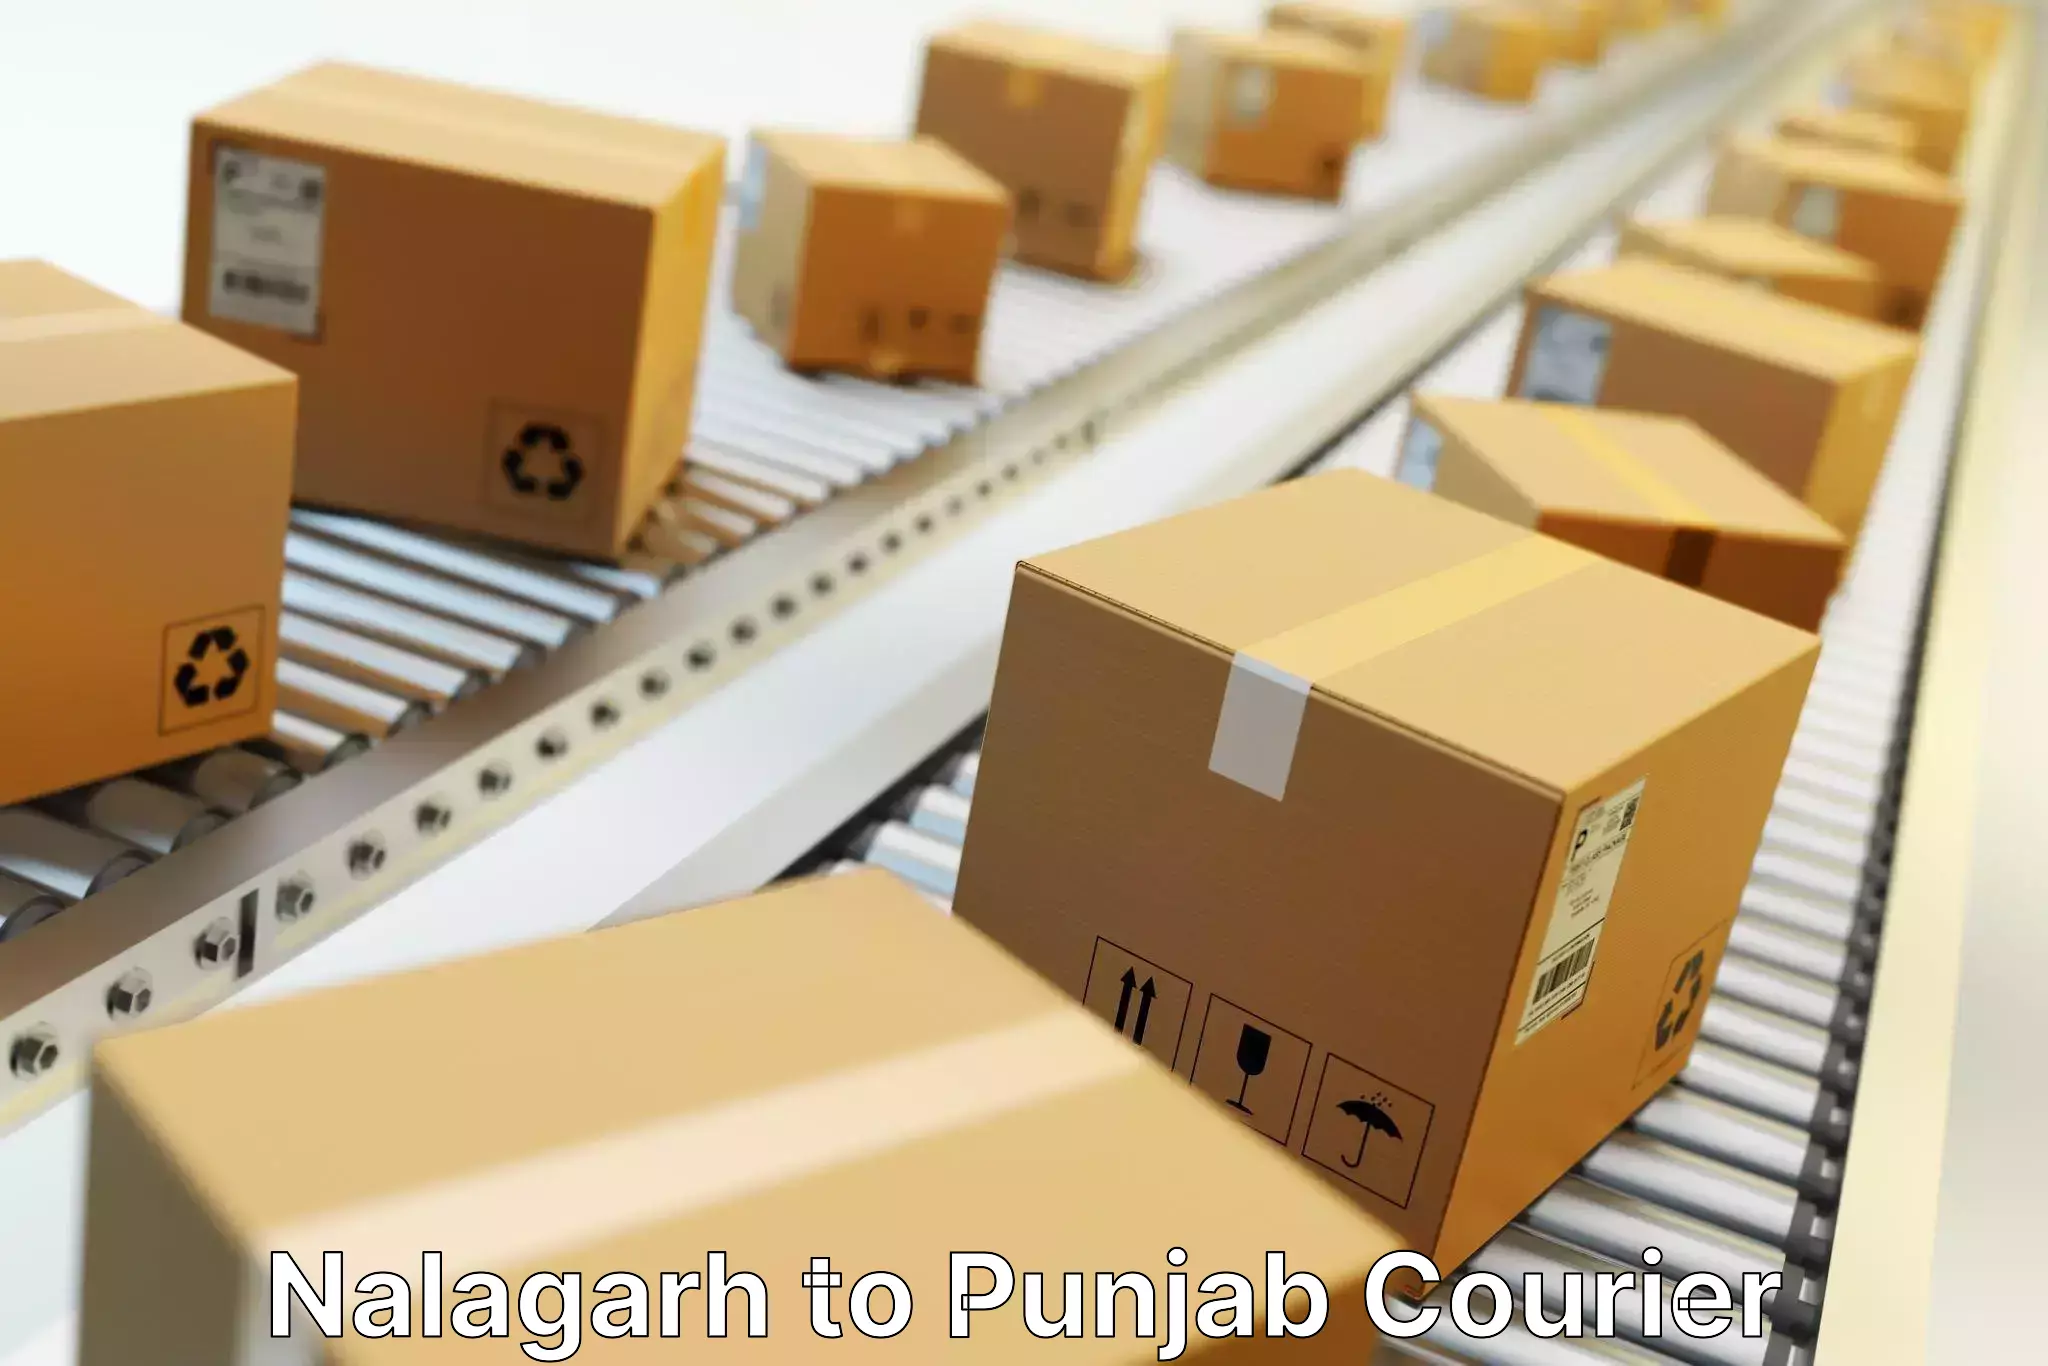 Personalized courier experiences Nalagarh to Faridkot